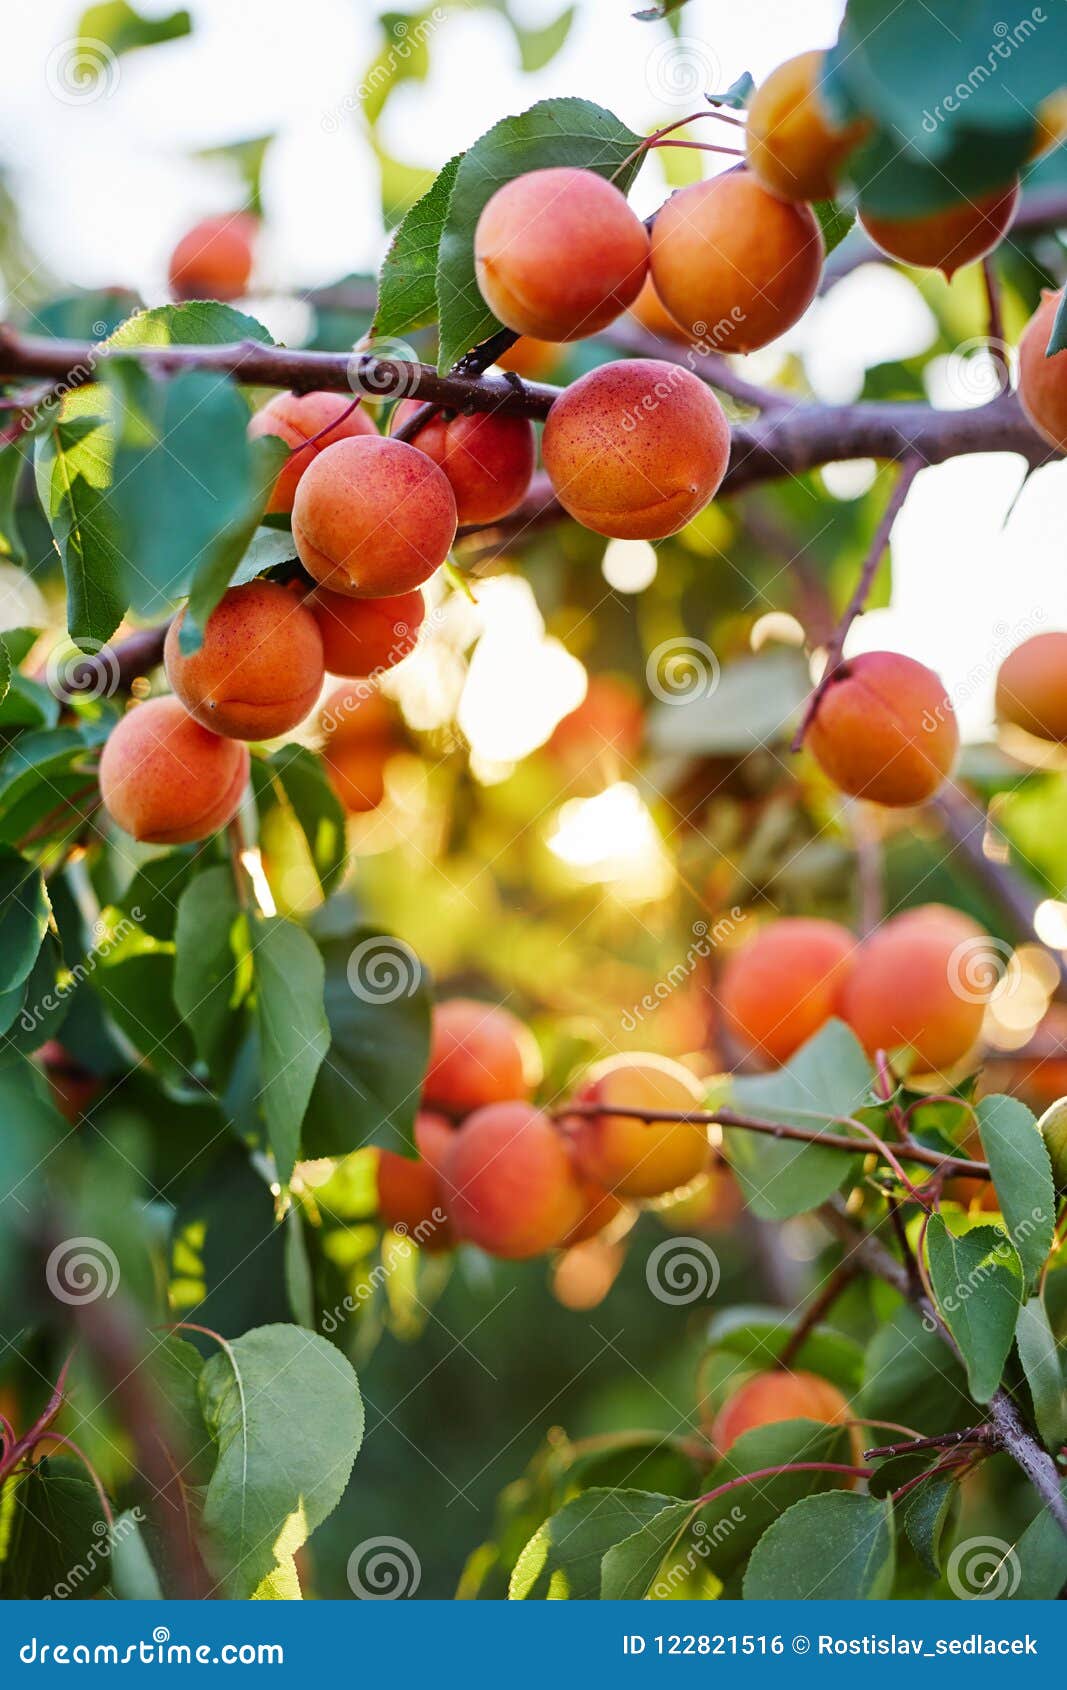 branch of tree with ripe apricots